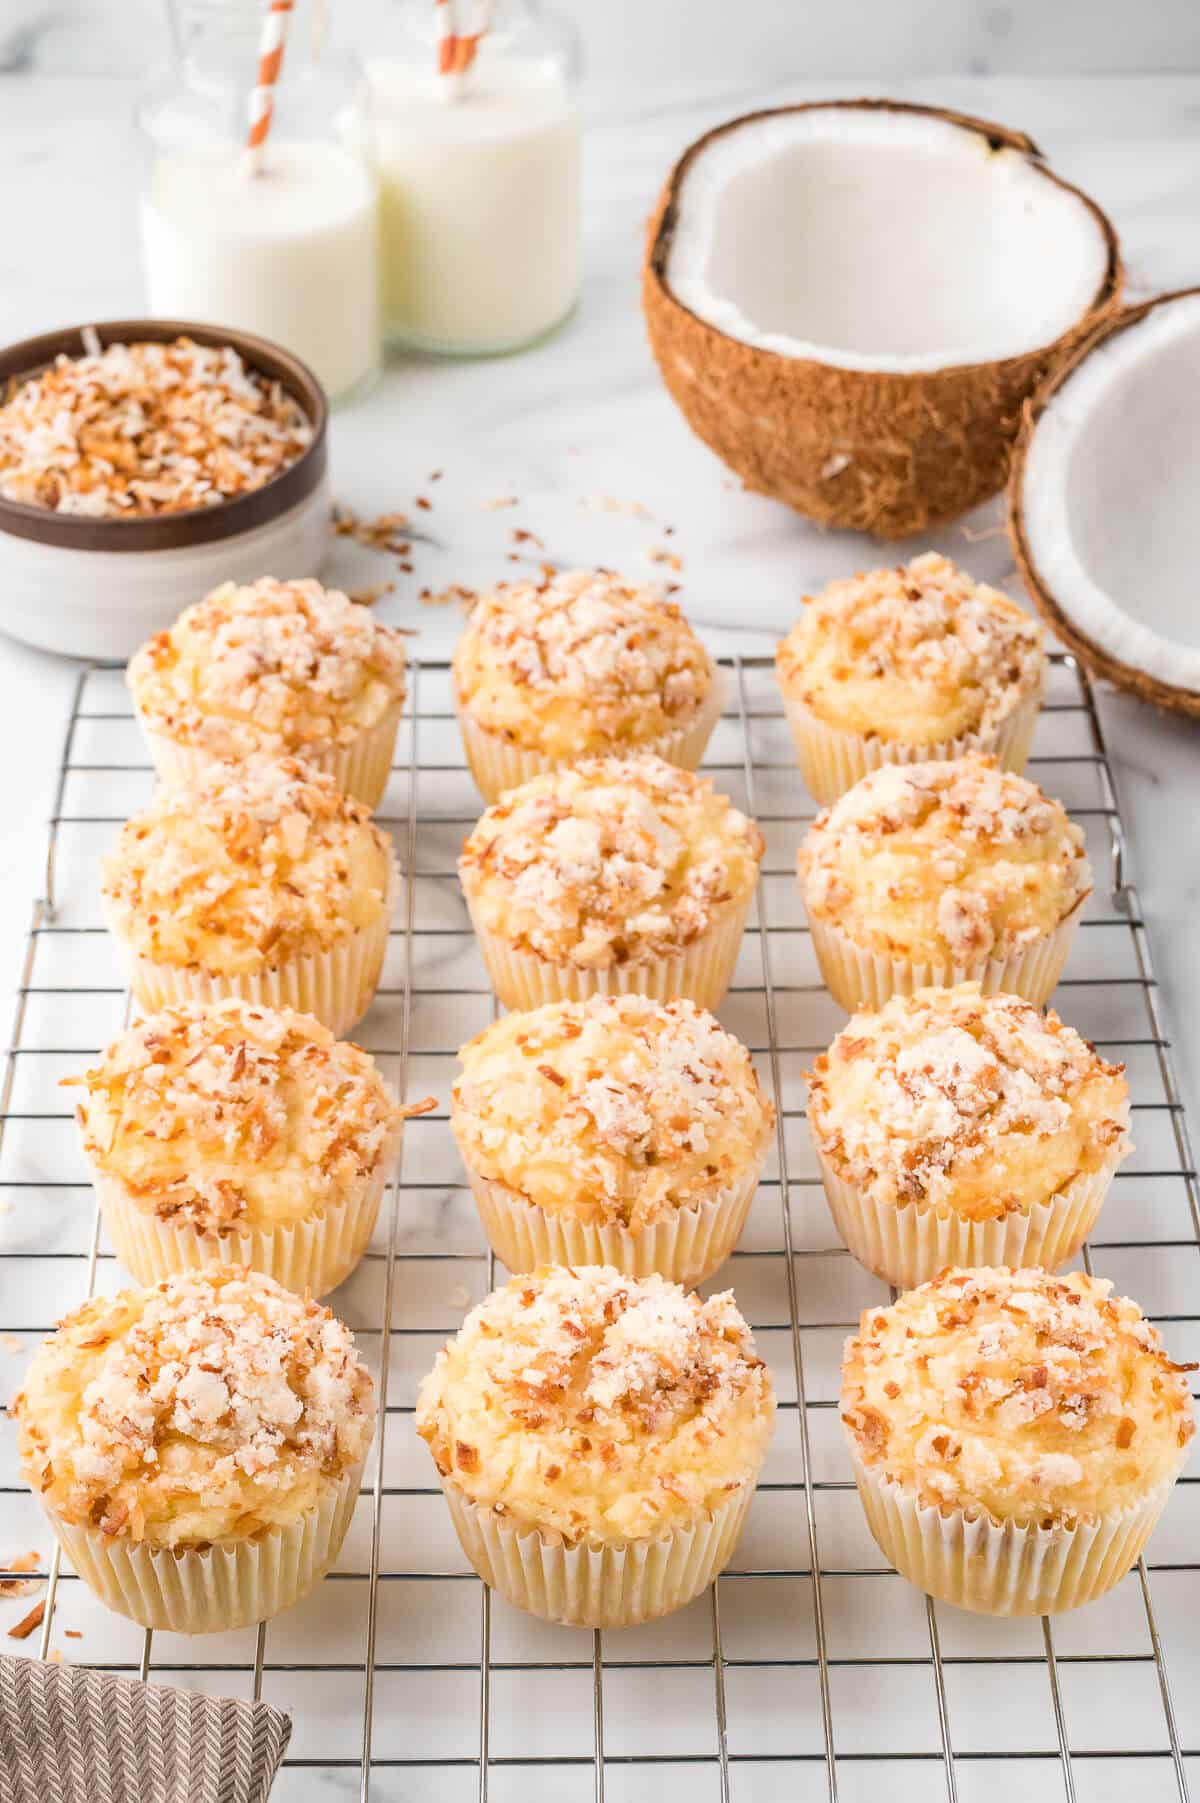 Toasted coconut muffins on a wire rack.